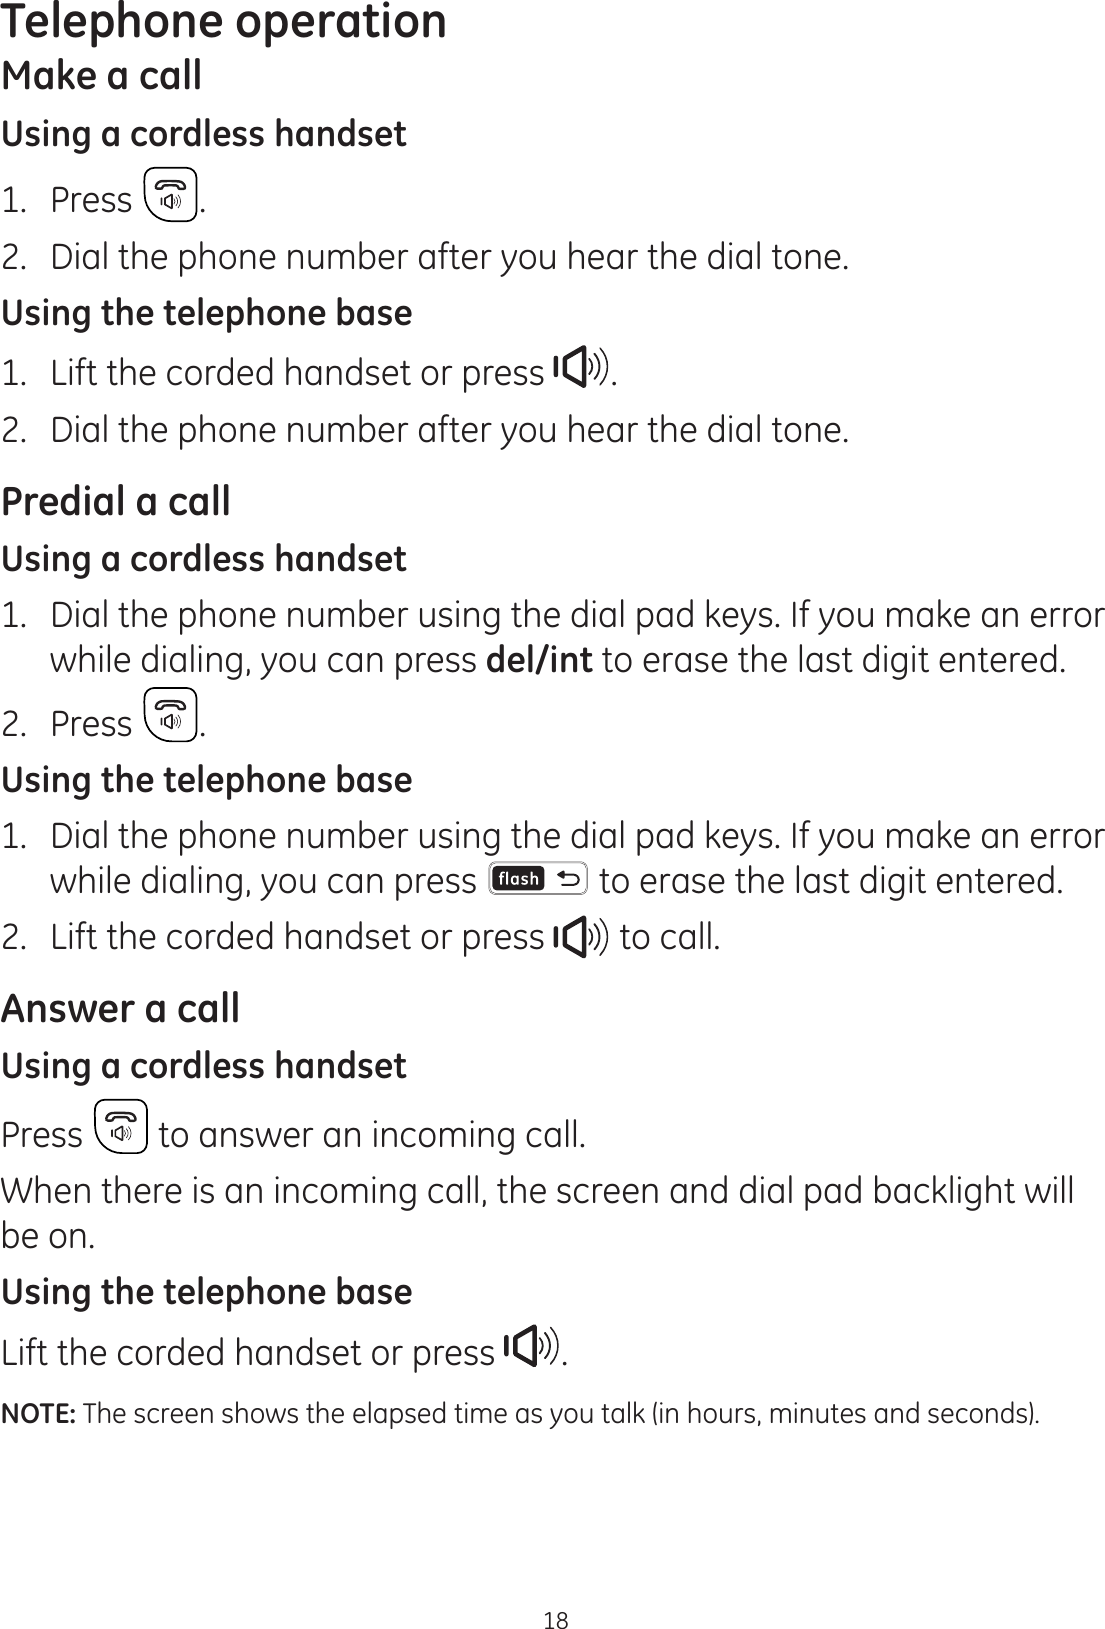 18Telephone operationMake a callUsing a cordless handset1.  Press  .2.  Dial the phone number after you hear the dial tone.Using the telephone base1.  Lift the corded handset or press  .2.  Dial the phone number after you hear the dial tone.Predial a callUsing a cordless handset1.  Dial the phone number using the dial pad keys. If you make an error while dialing, you can press del/int to erase the last digit entered. 2.  Press .Using the telephone base1.  Dial the phone number using the dial pad keys. If you make an error while dialing, you can press   to erase the last digit entered. 2.  Lift the corded handset or press   to call. Answer a callUsing a cordless handsetPress   to answer an incoming call. When there is an incoming call, the screen and dial pad backlight will be on.Using the telephone baseLift the corded handset or press  .NOTE: The screen shows the elapsed time as you talk (in hours, minutes and seconds).